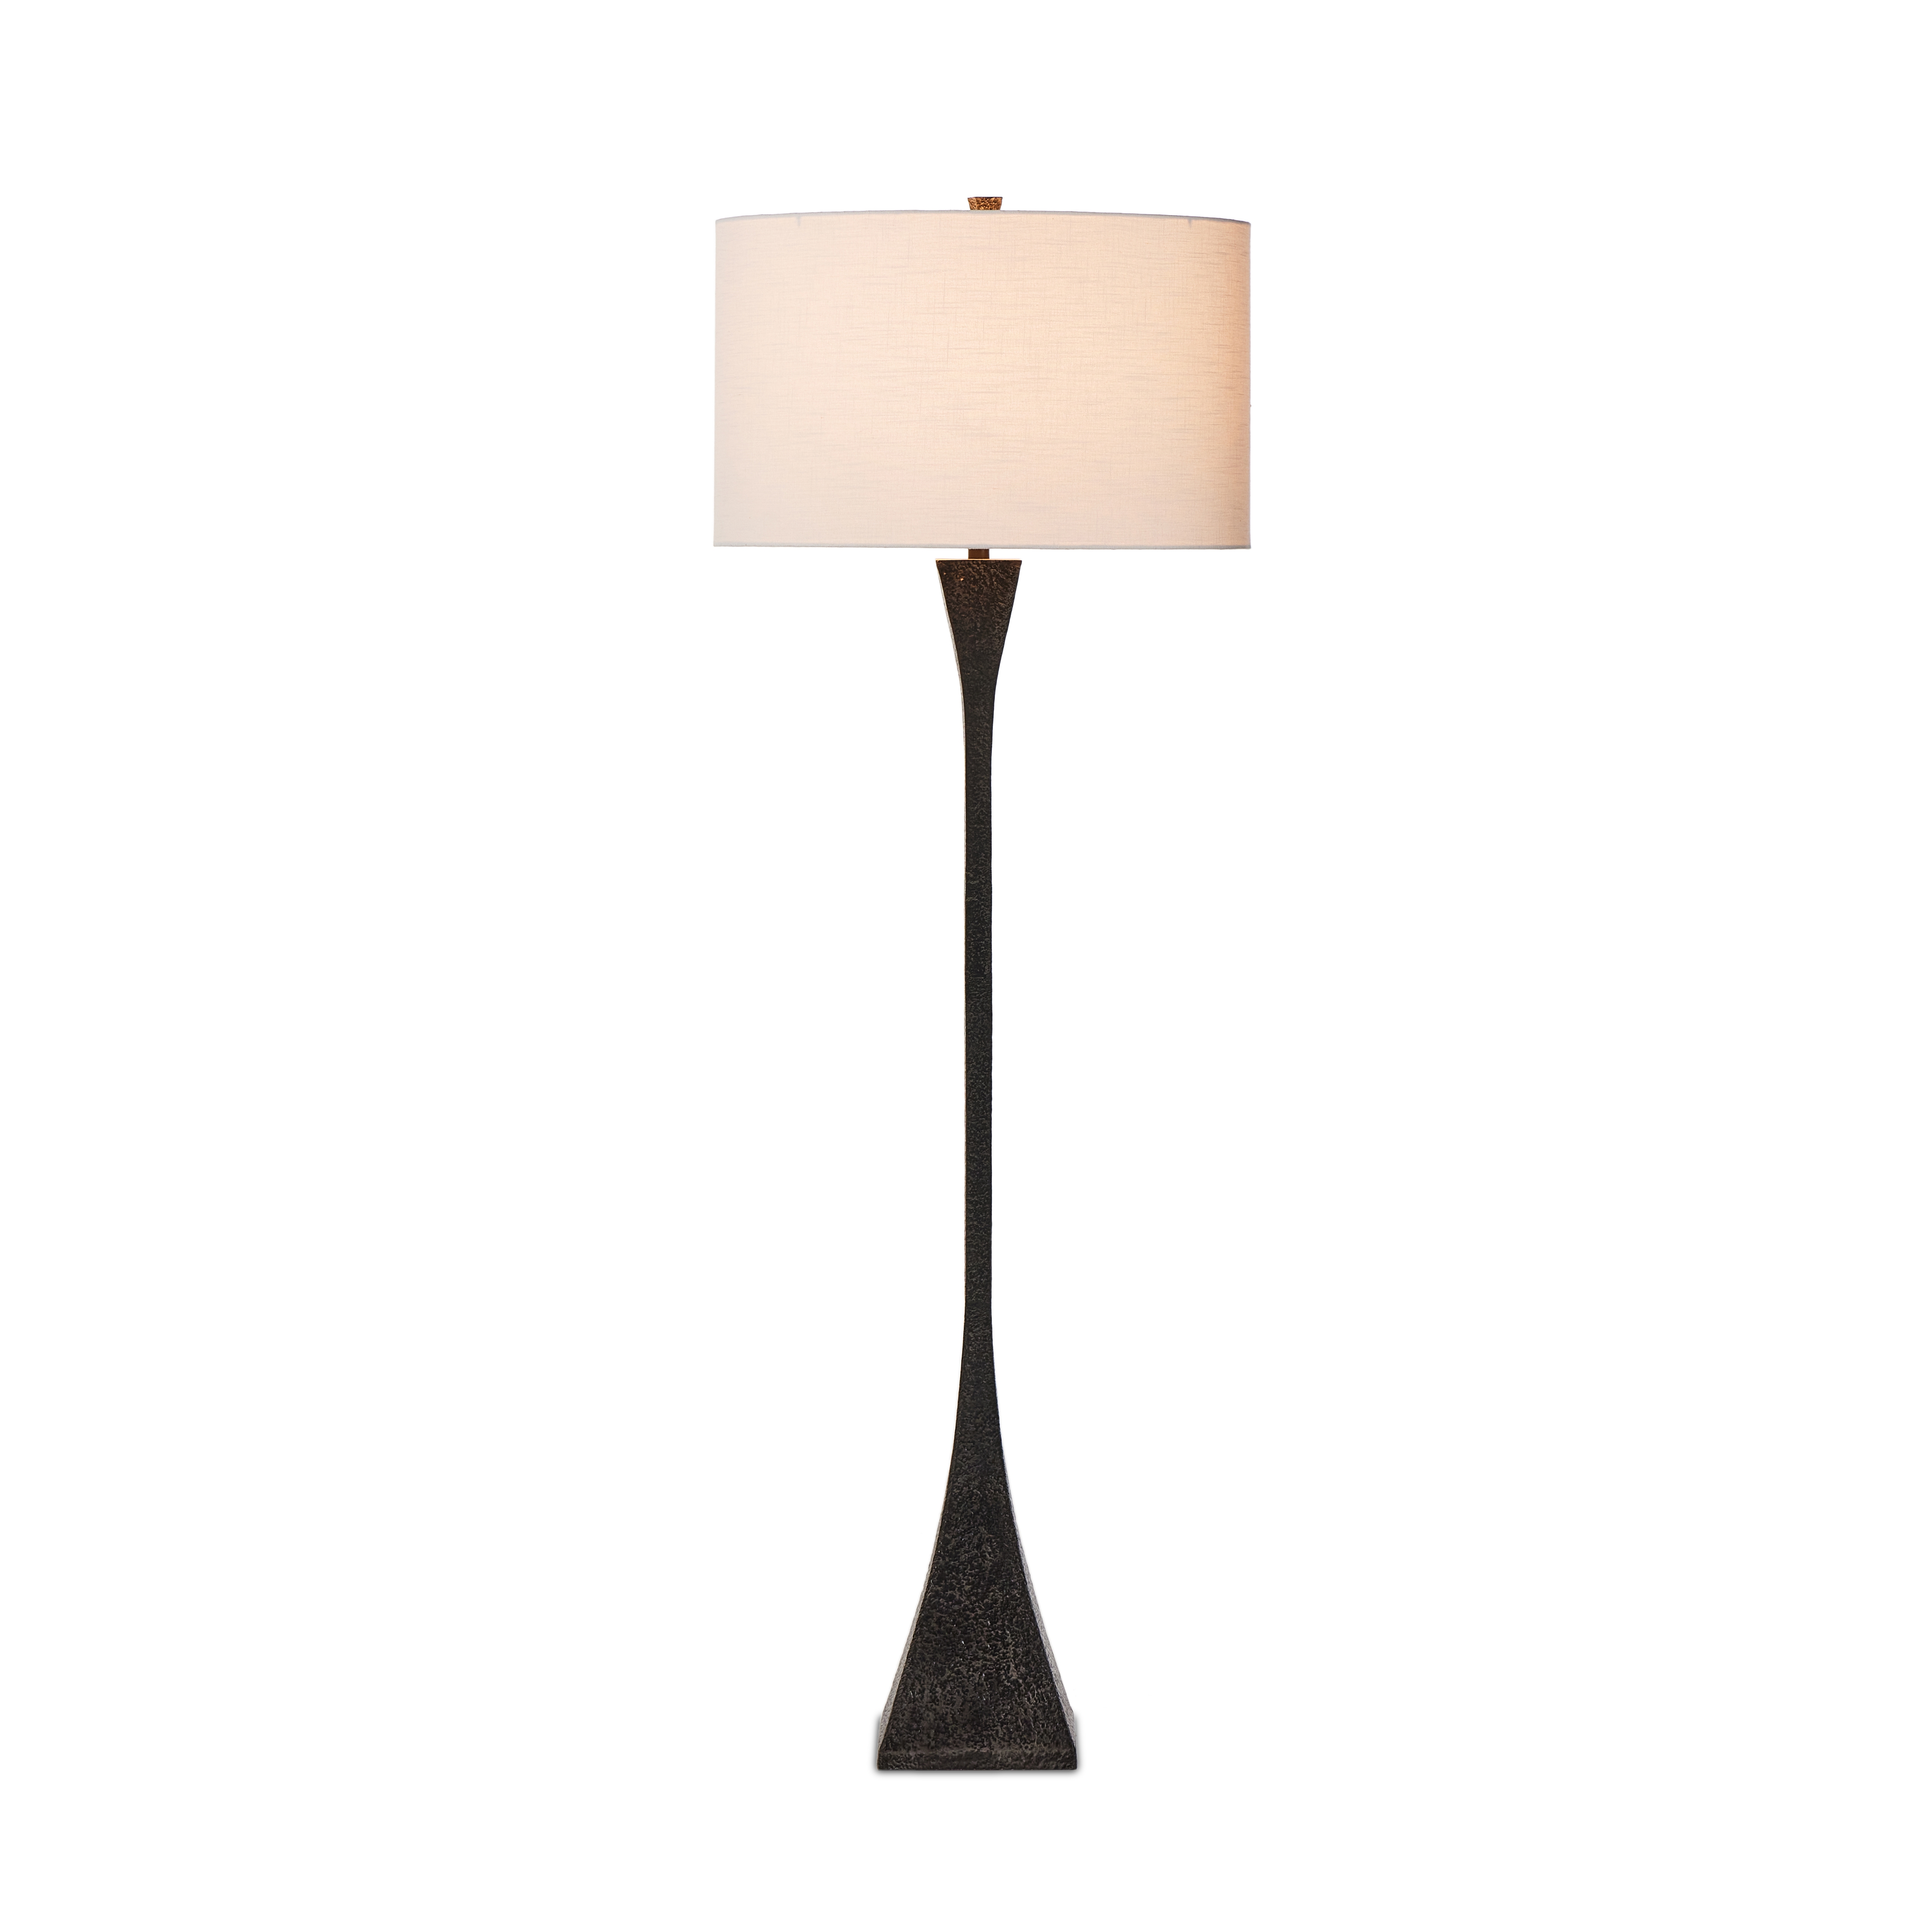 Tapered Forged Floor Lamp-Forged Blk - Image 2